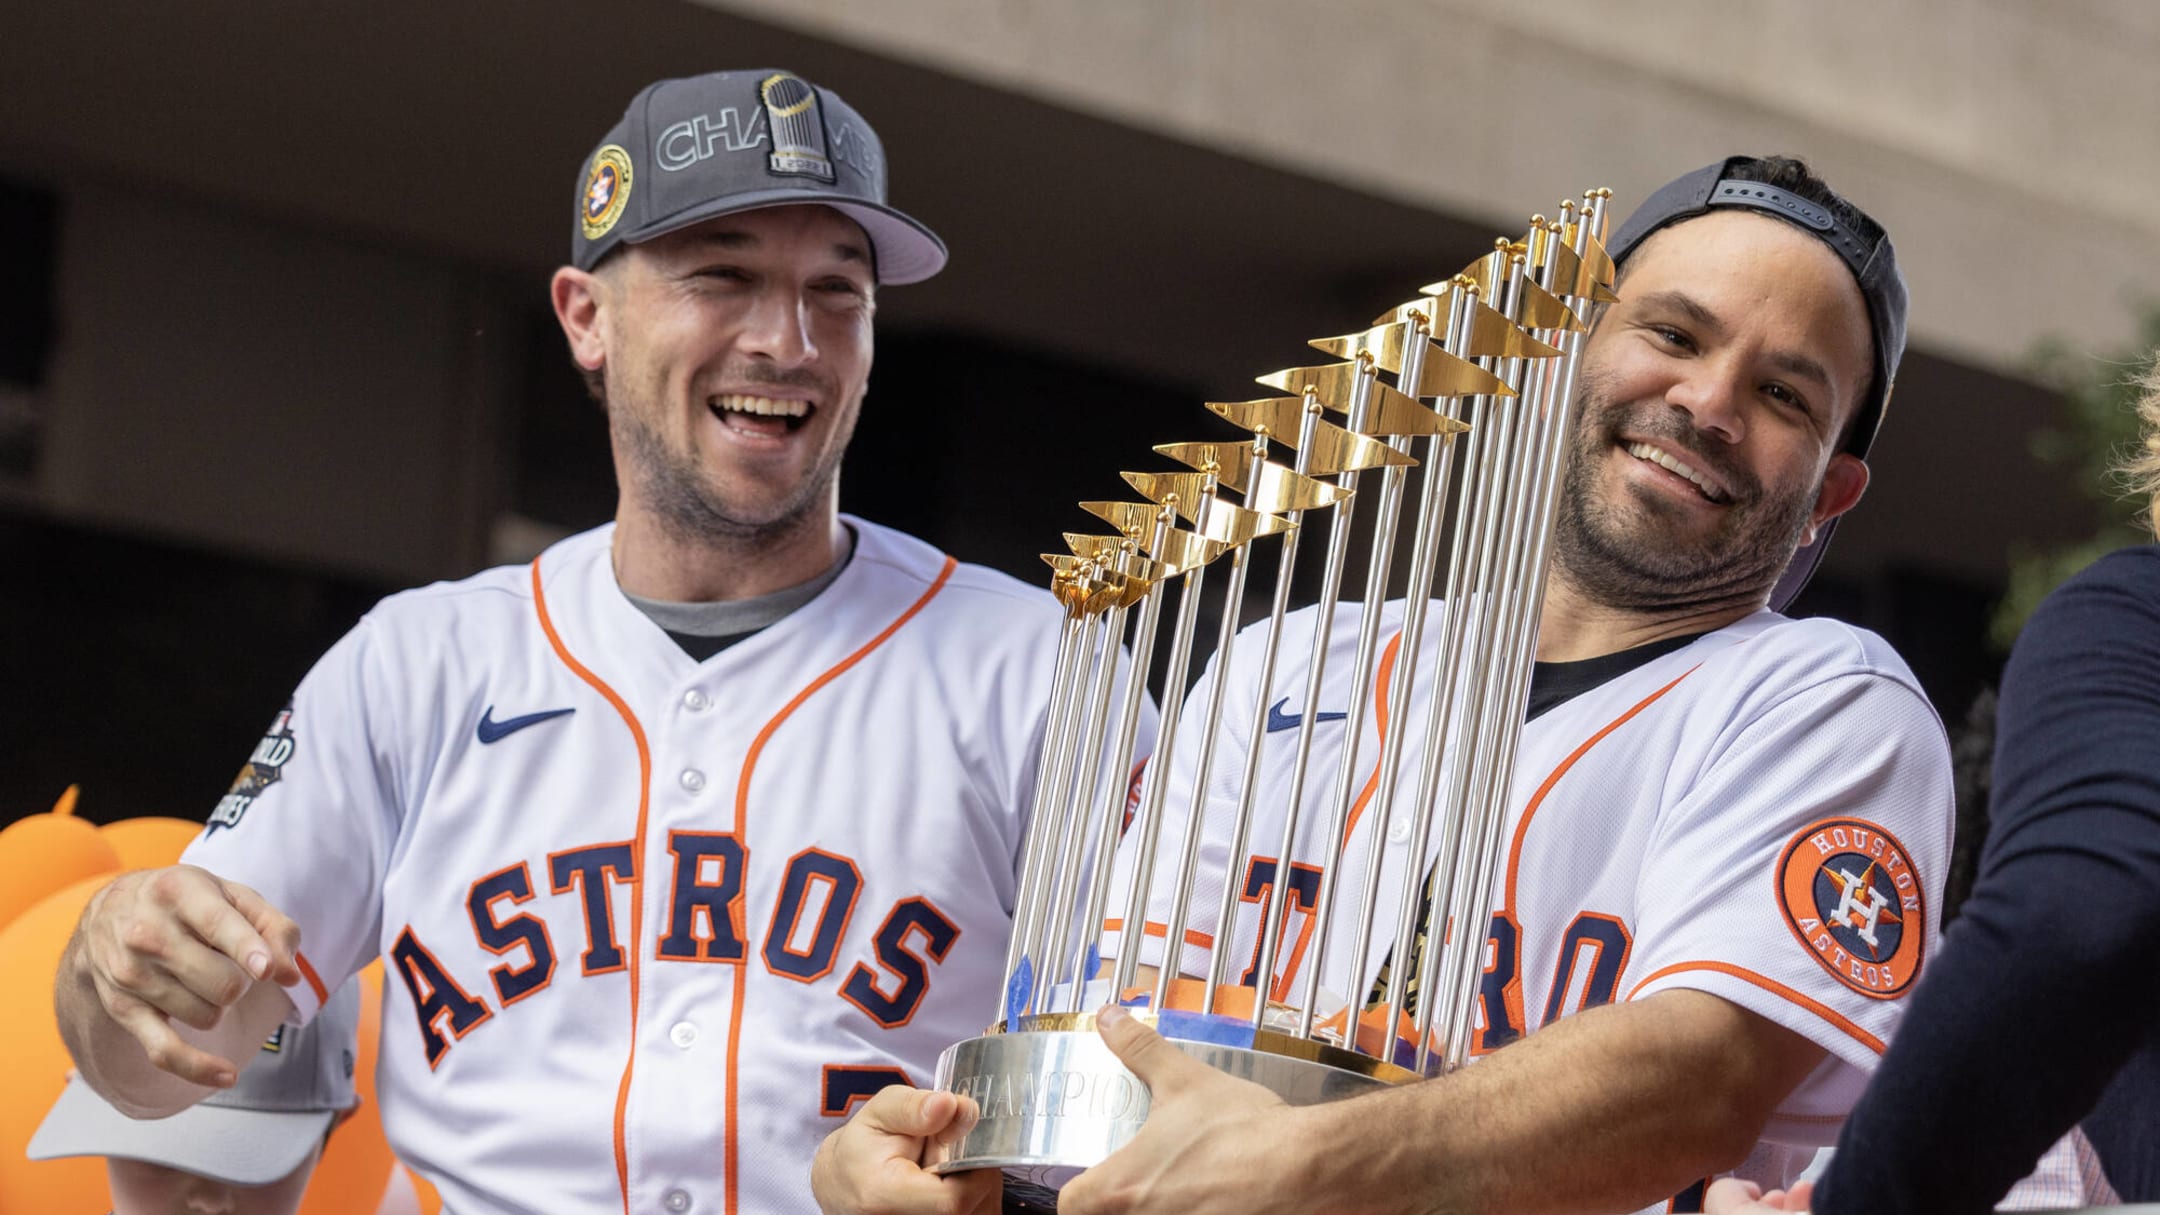 Houston Astros on X: Huuuuge day celebrating @ABREG_1 and